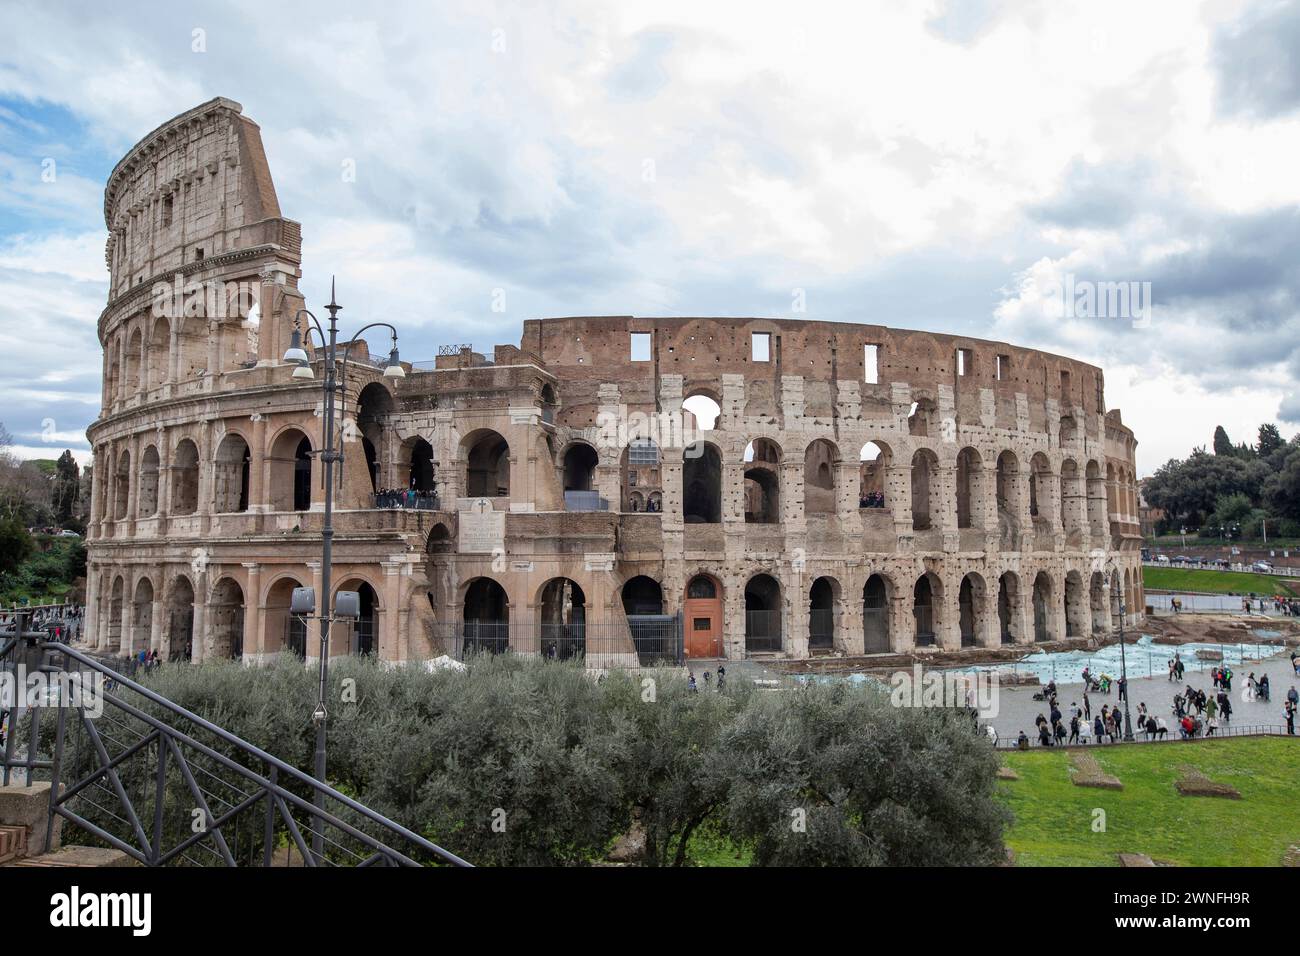 Exterior view of the ancient Roman Colloseum or Flavian Amphitheather in Rome, Italy. Stock Photo